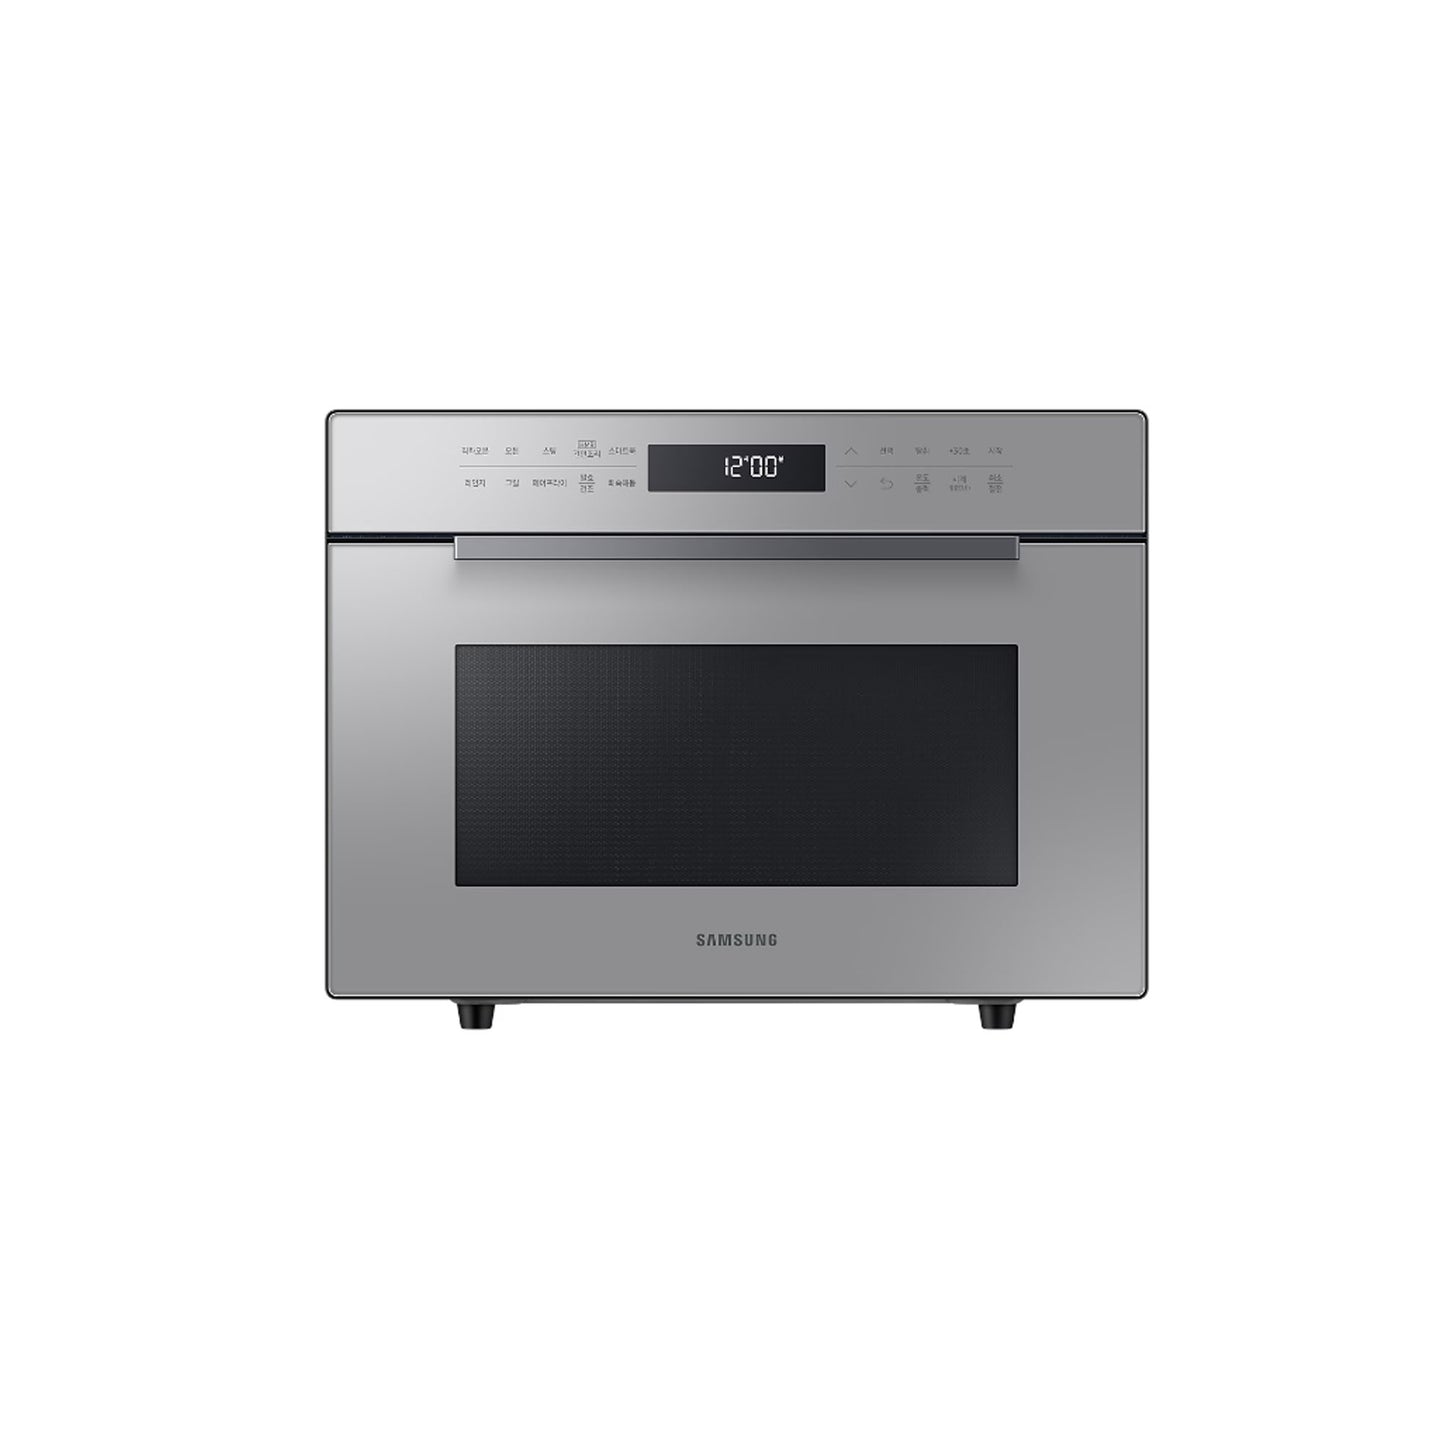 Samsung Bespoke 35L Convection Microwave Oven with Hot Blast